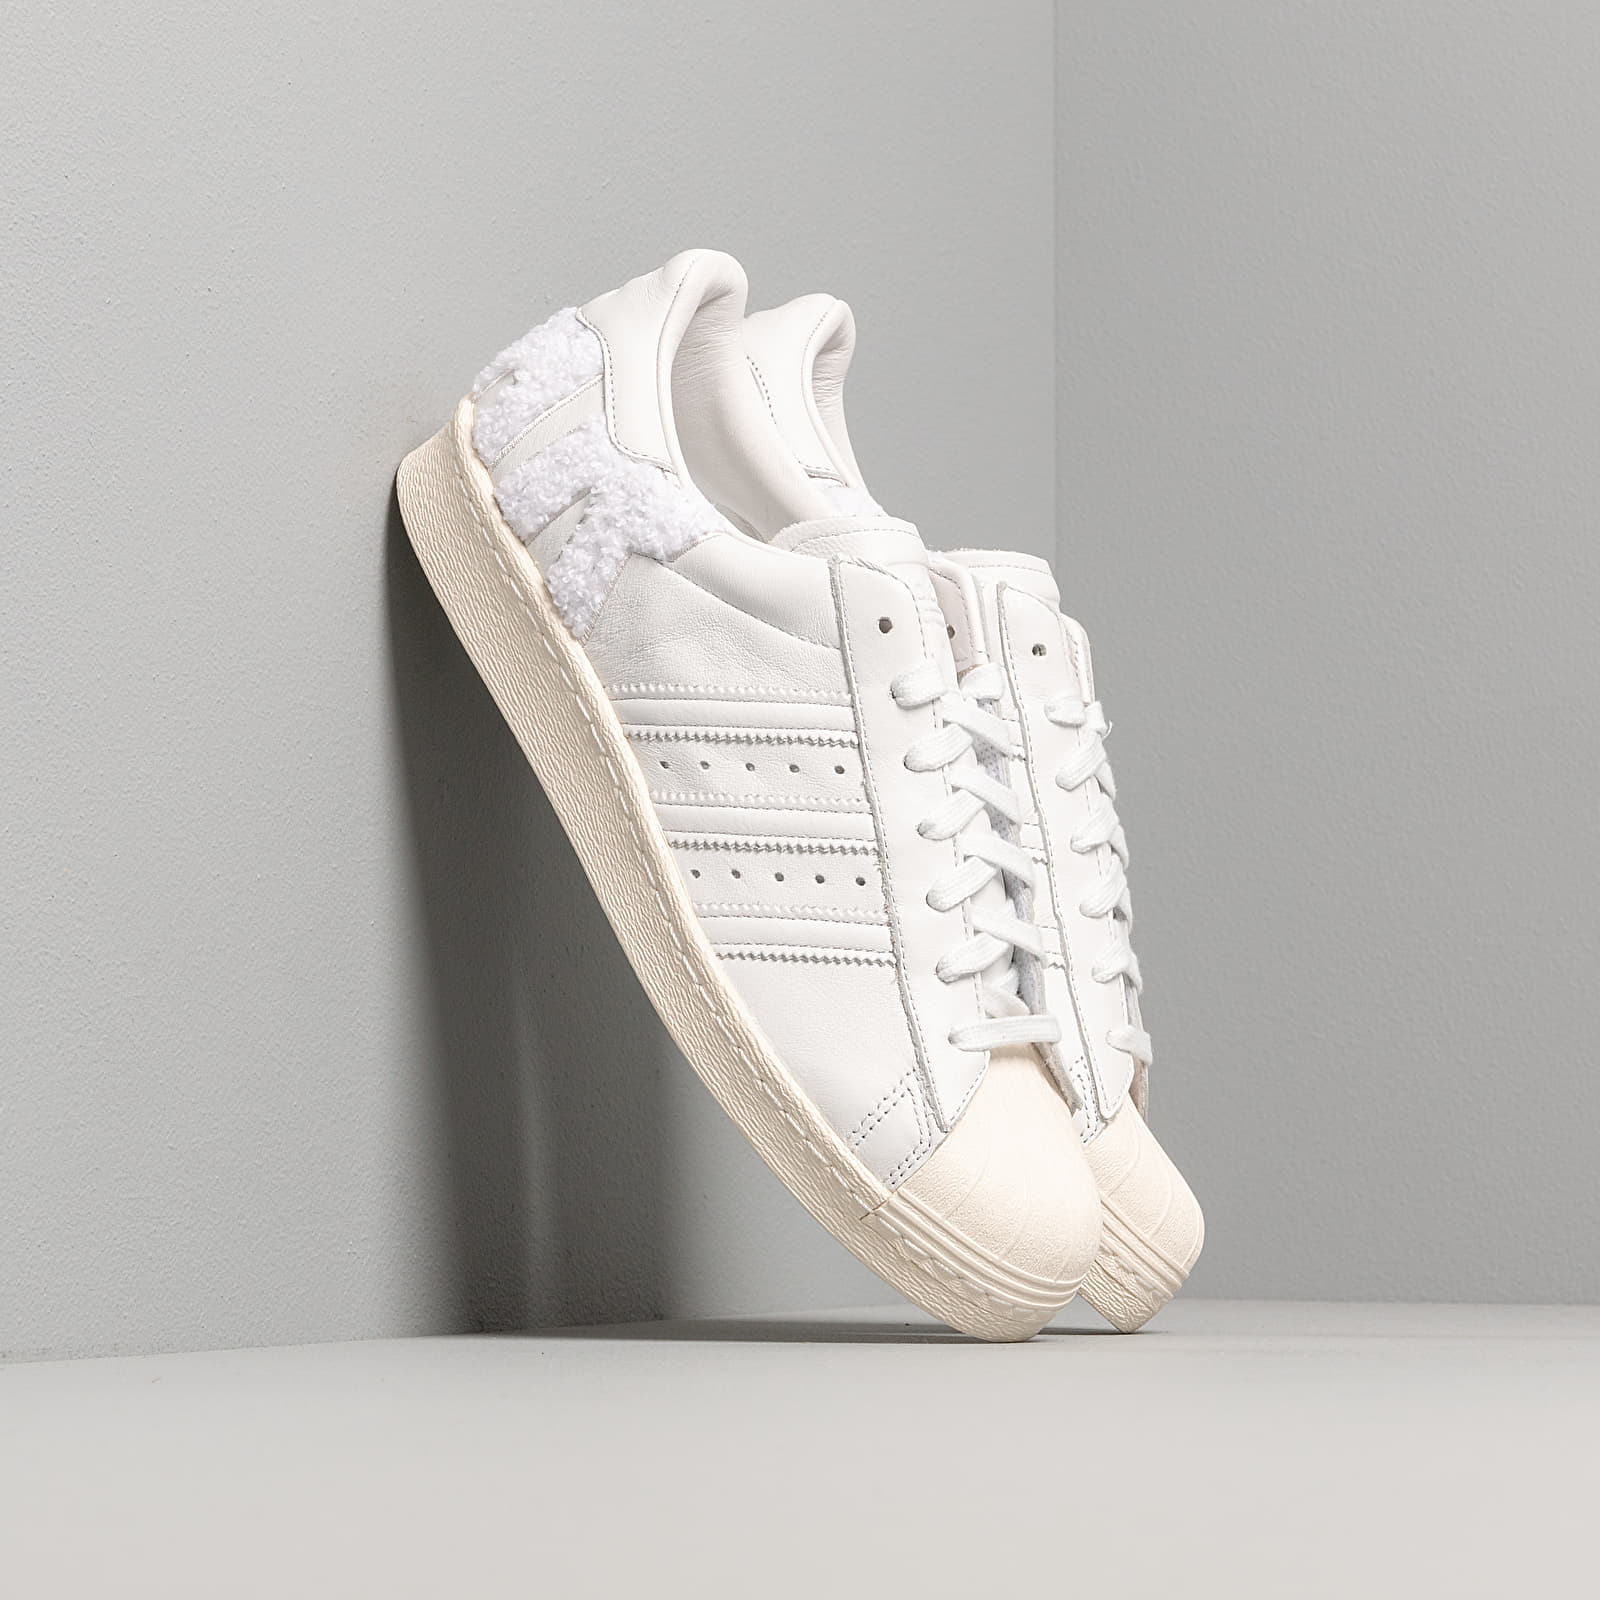 Chaussures et baskets homme adidas Superstar 80s Crystal White/ Crystal White/ Off White